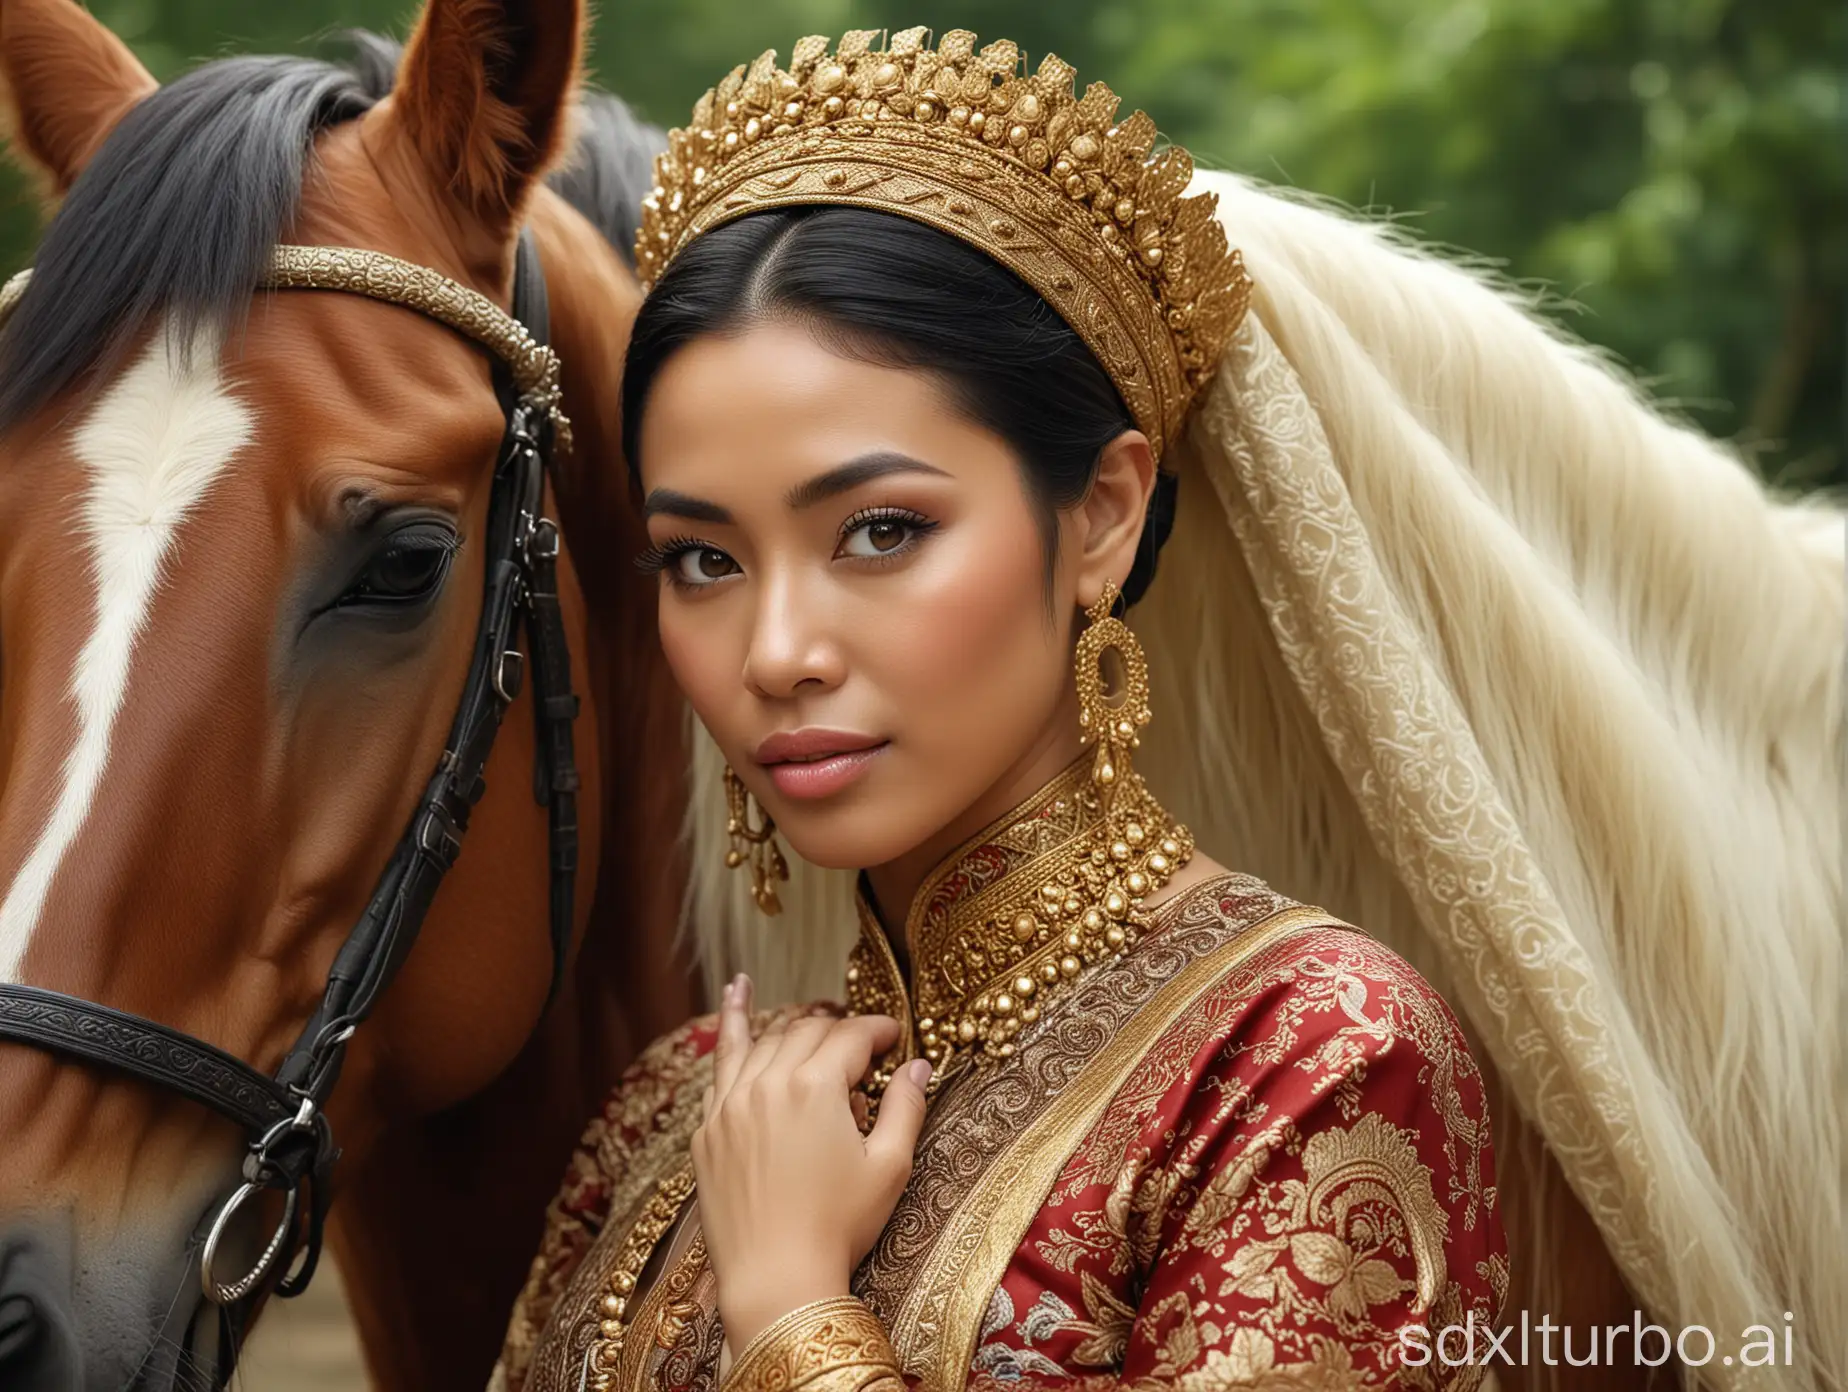 A hyperrealistic photo of a beautiful Javanese woman wearing traditional Javanese attire from ancient Java. Lovingly embracing a horse. The photo is very bright and looks very realistic. Shot with a Sony camera, close up.